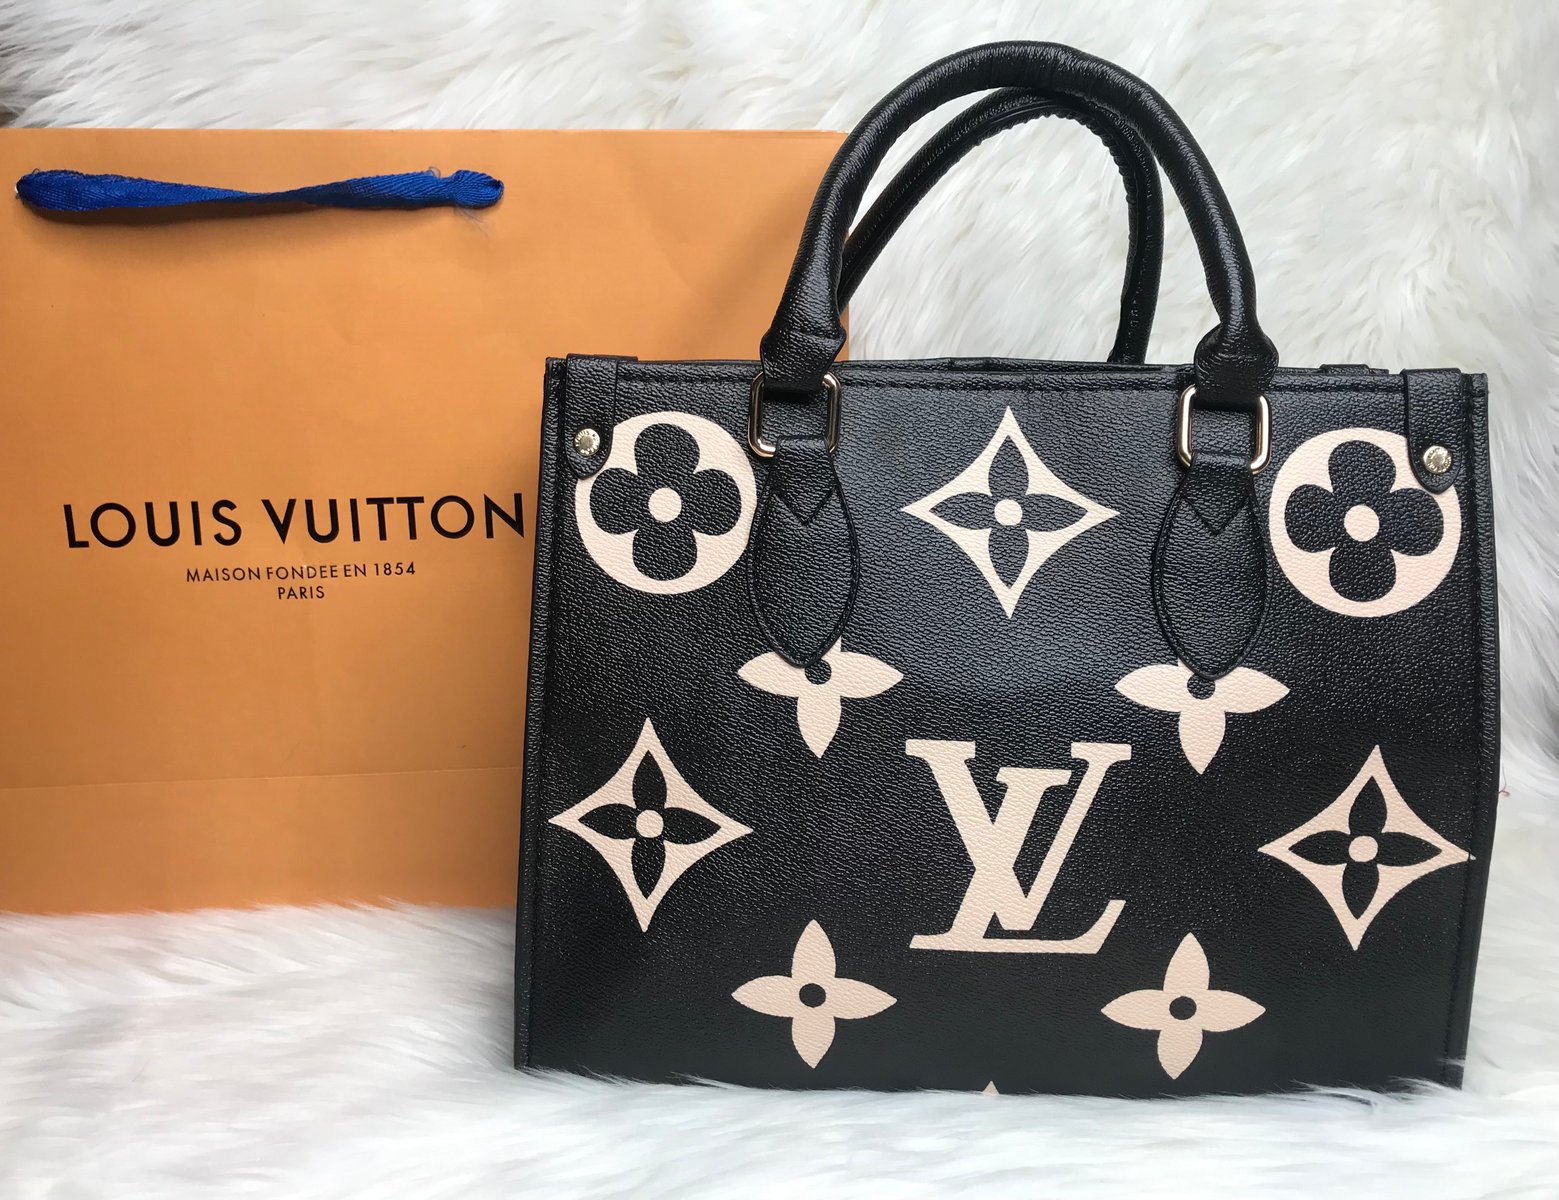 Bougie On A Budget, Large OnTheGo Brown Louis Vuitton Bag, This Won't  Disappoint